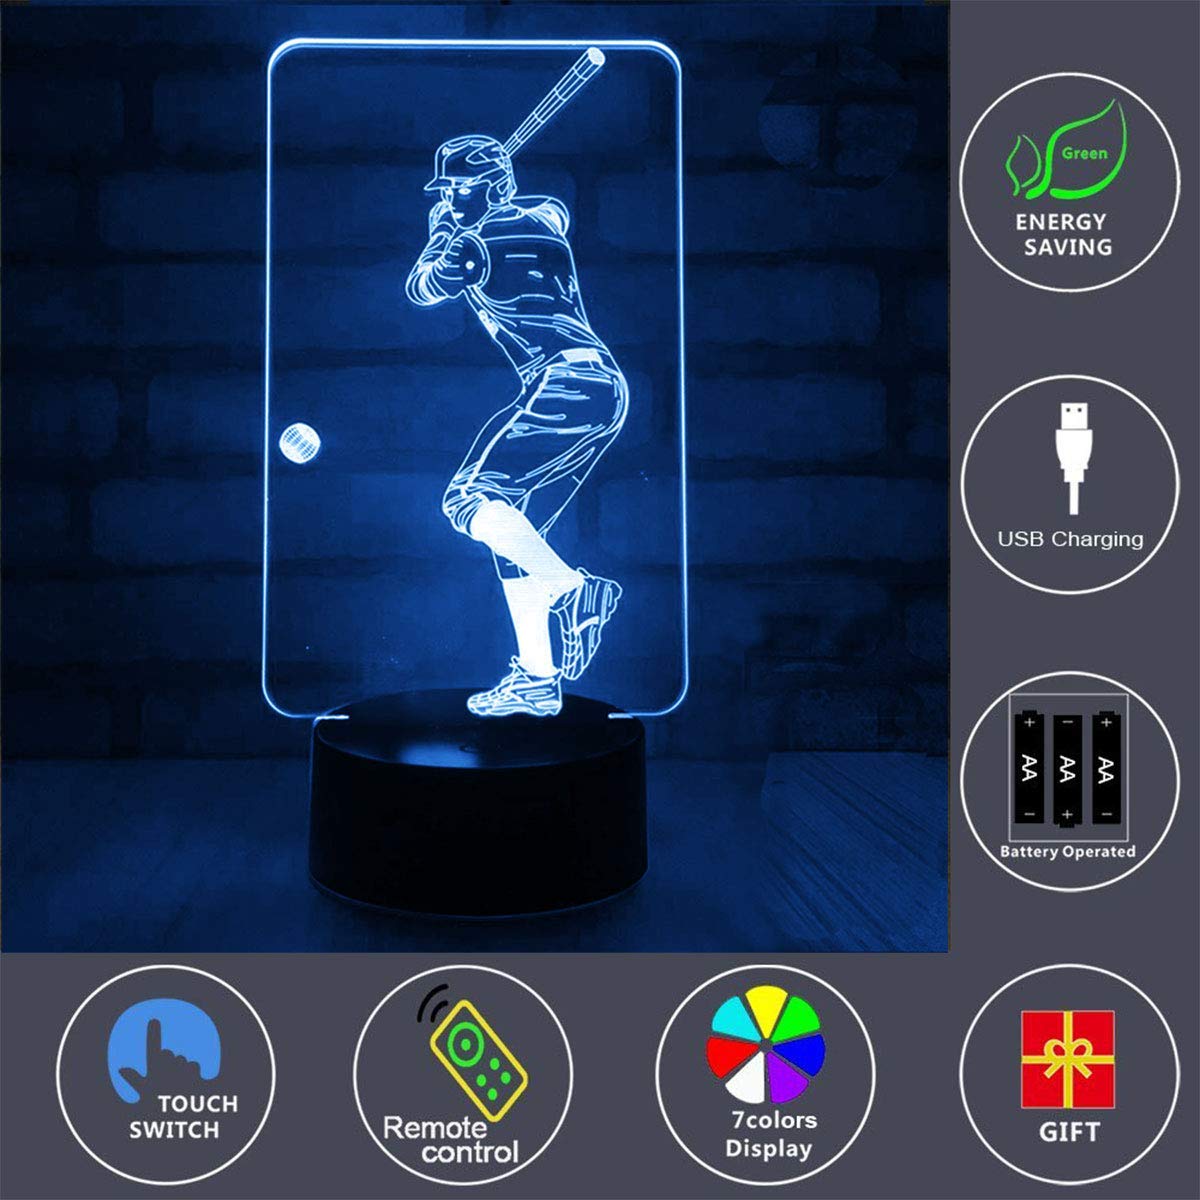 3D Remote Night Stand Light, EpicGadget Touch Control Optical Illusion Visualization LED Night Light Lamp 7 Colors Changing Remote Control Night Light Lamp Stand (Baseball Player) - image 3 of 3